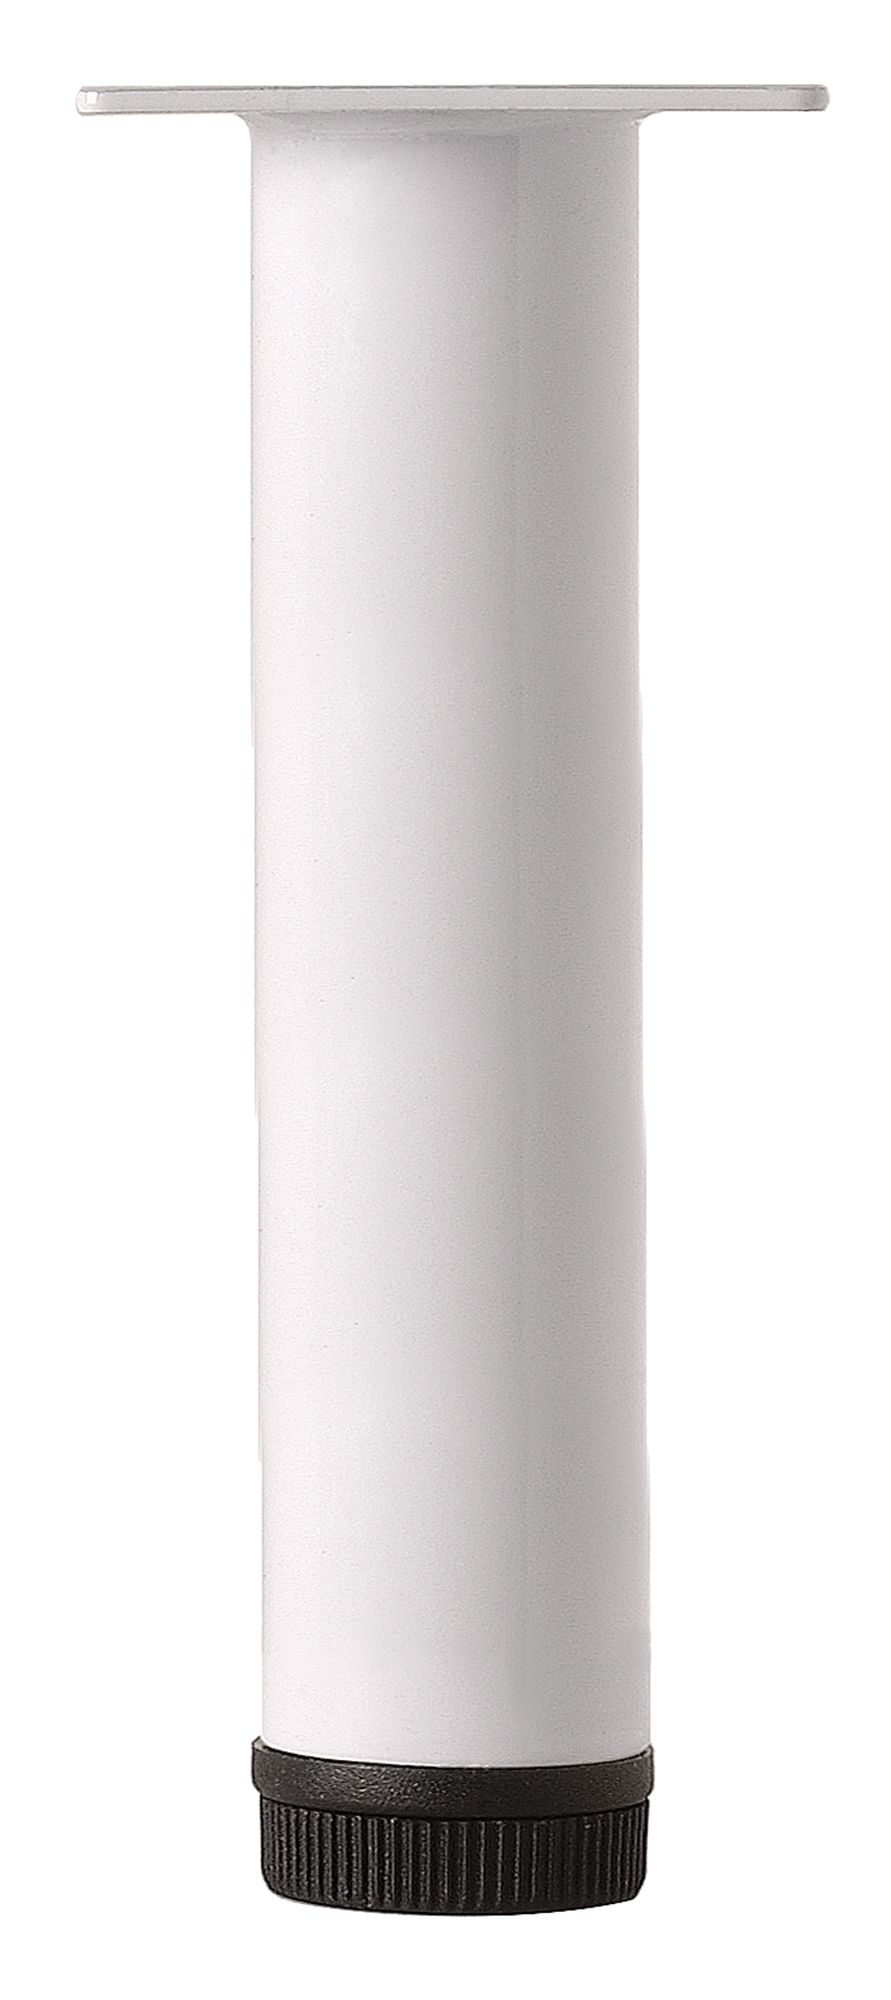 Rothley Painted White Furniture leg (Dia)32mm